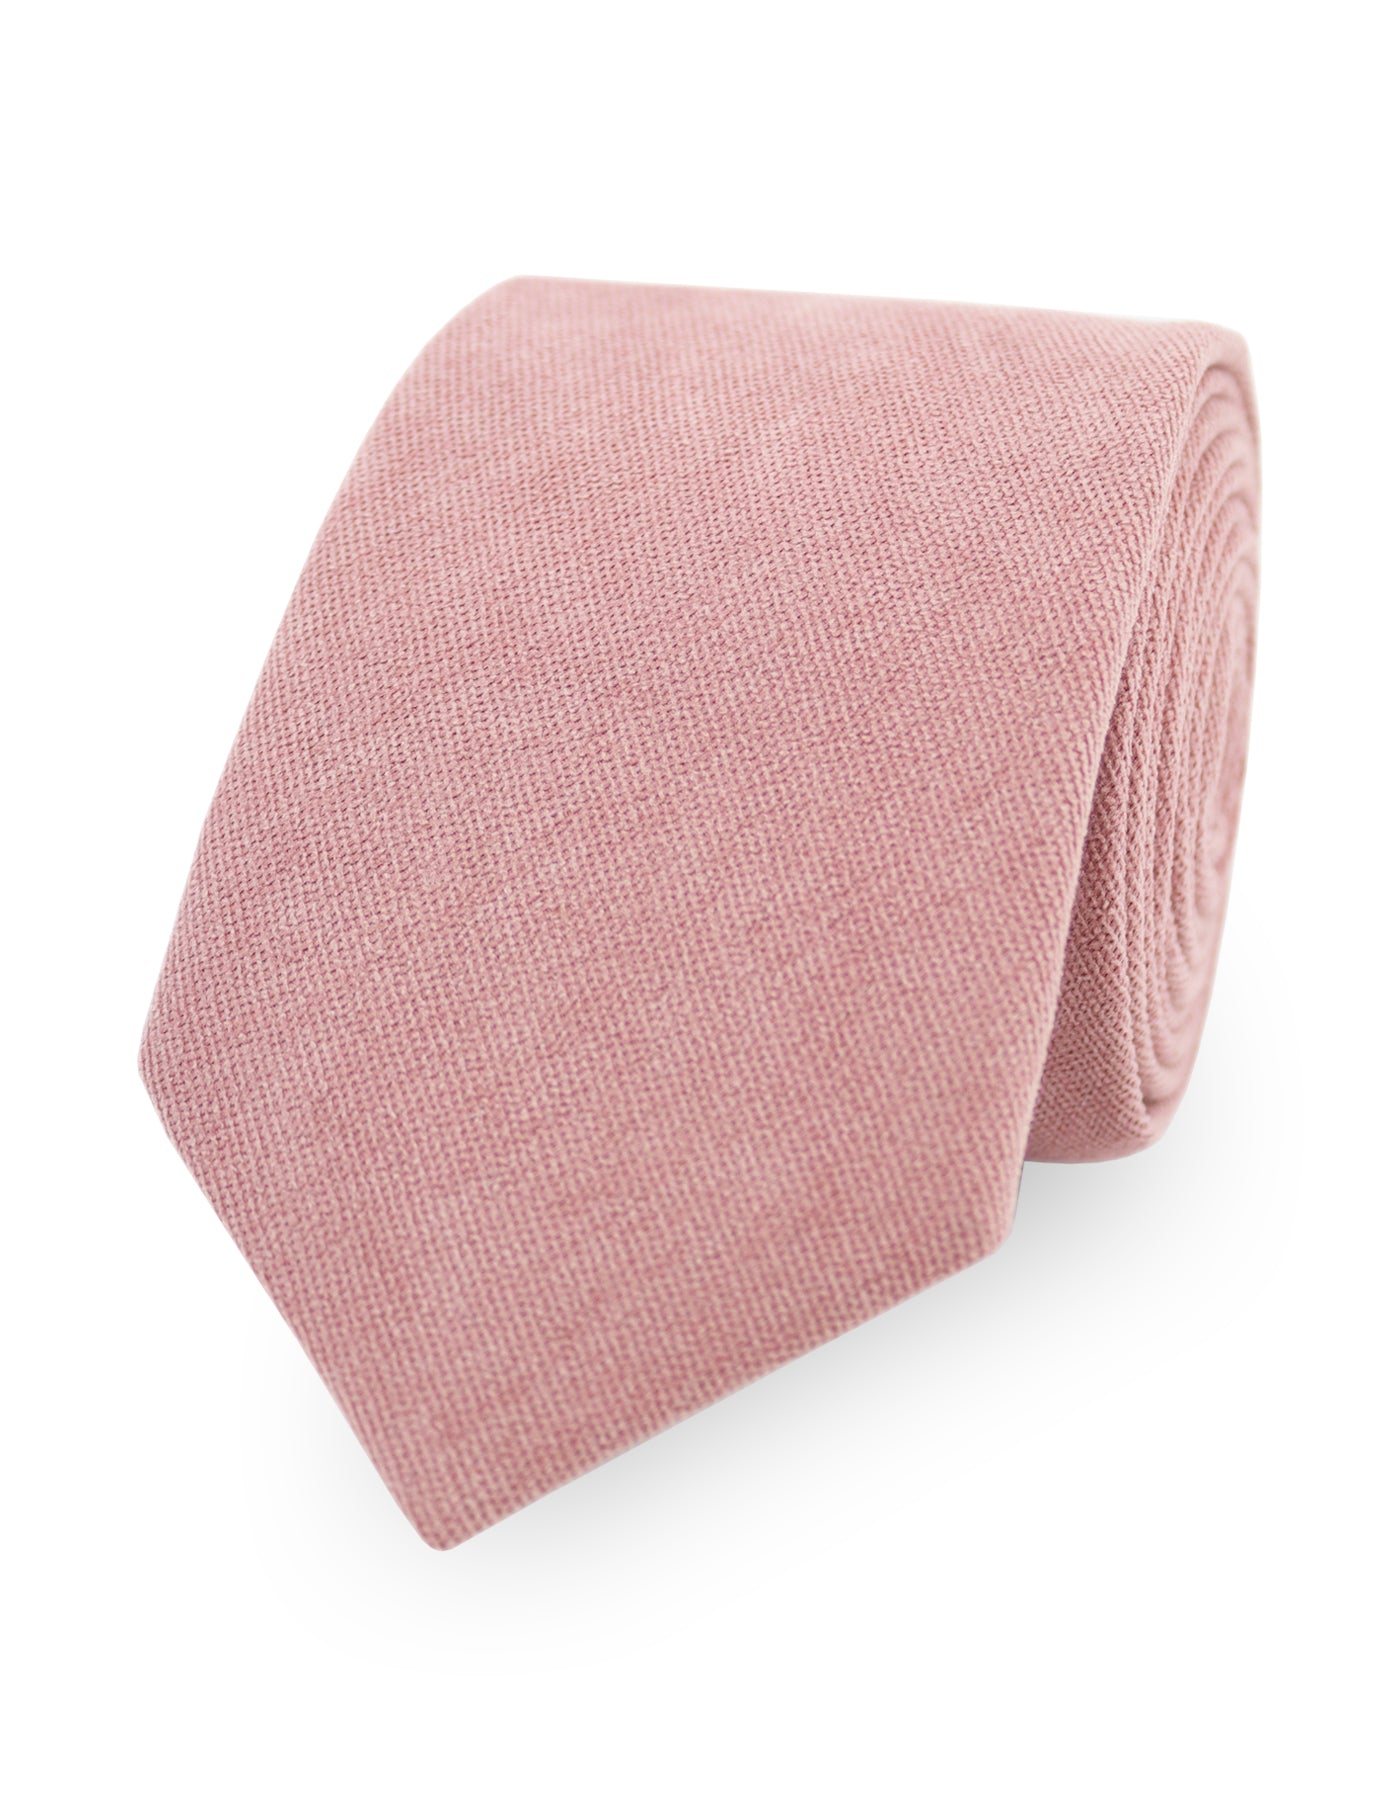 100% Brushed Cotton Suede Bow Tie - Pink